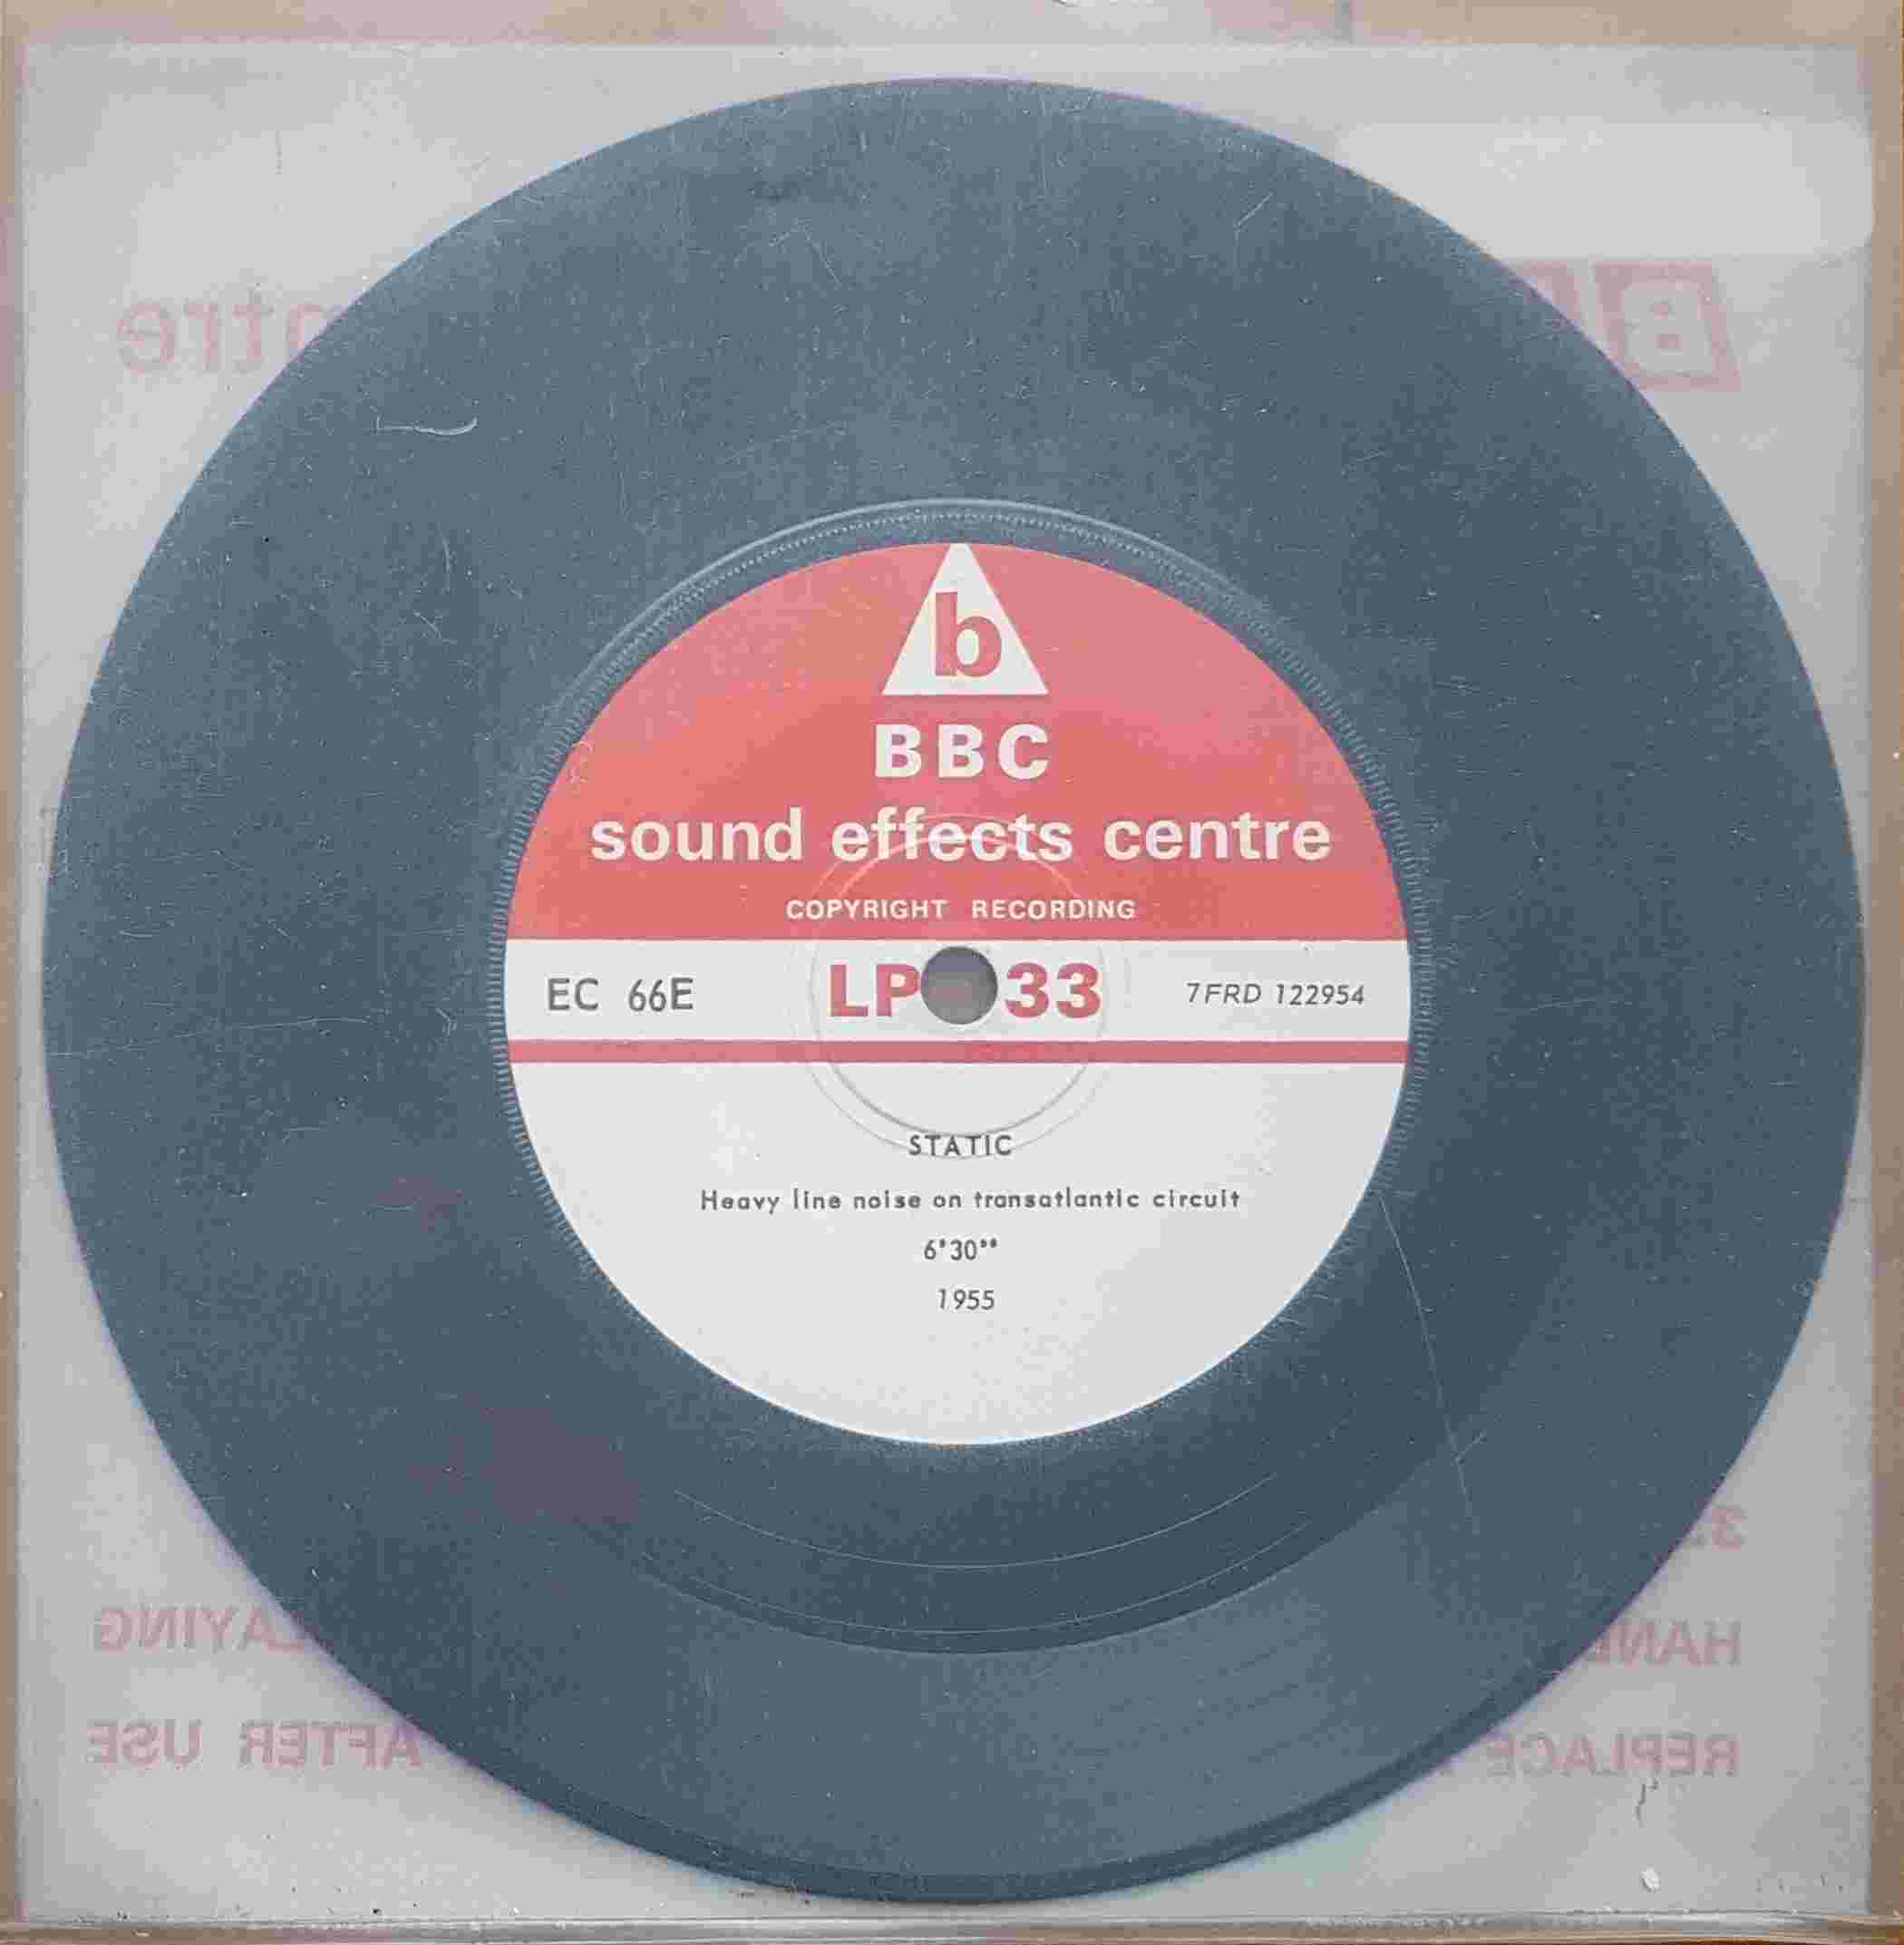 Picture of EC 66E Static by artist Not registered from the BBC records and Tapes library